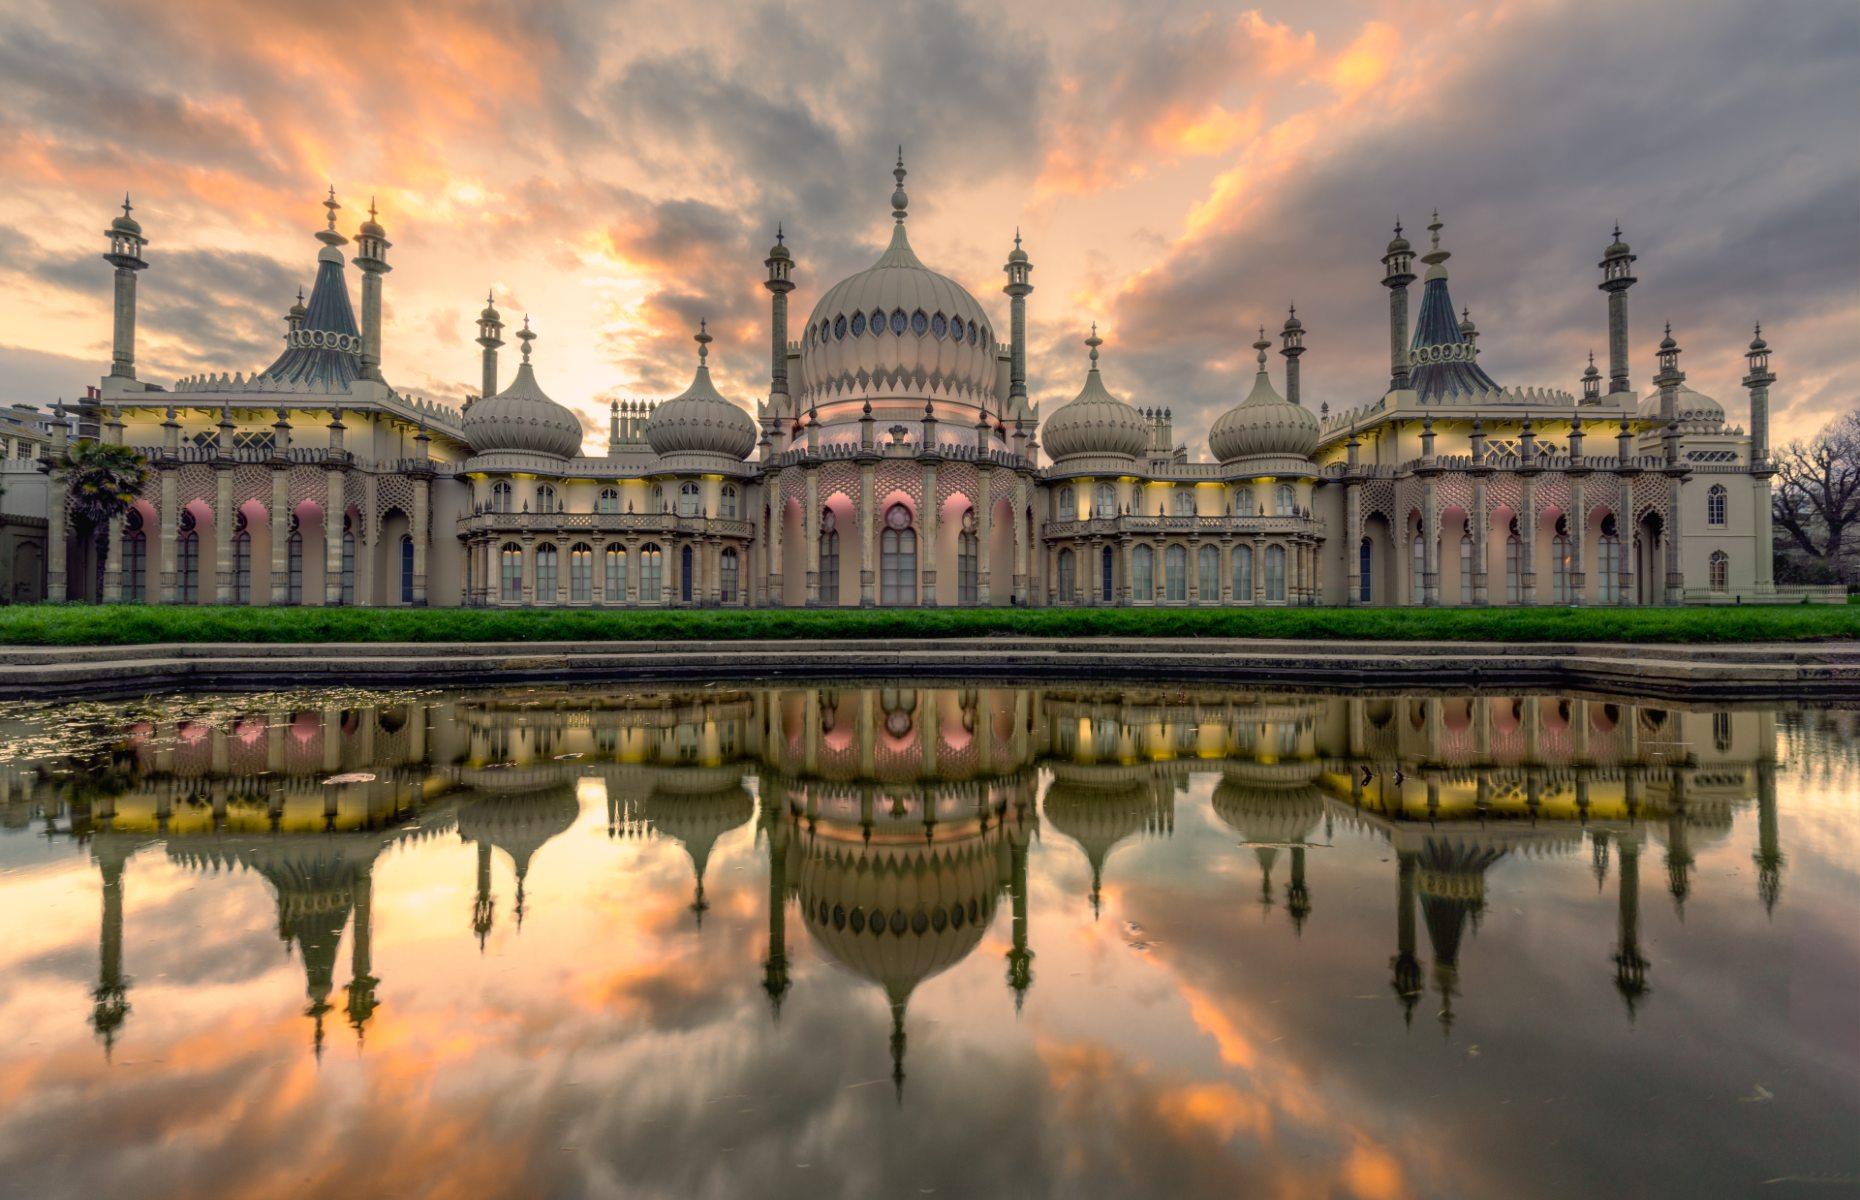 This grand landmark in Brighton was used as a seaside retreat for King George IV during the 18th century, when the city was becoming a popular resort. Here, the majestic structure, which was built using a combination of Indian, Mughal, European and Chinese architectural styles, becomes even more spellbinding against a backdrop of dramatic clouds.